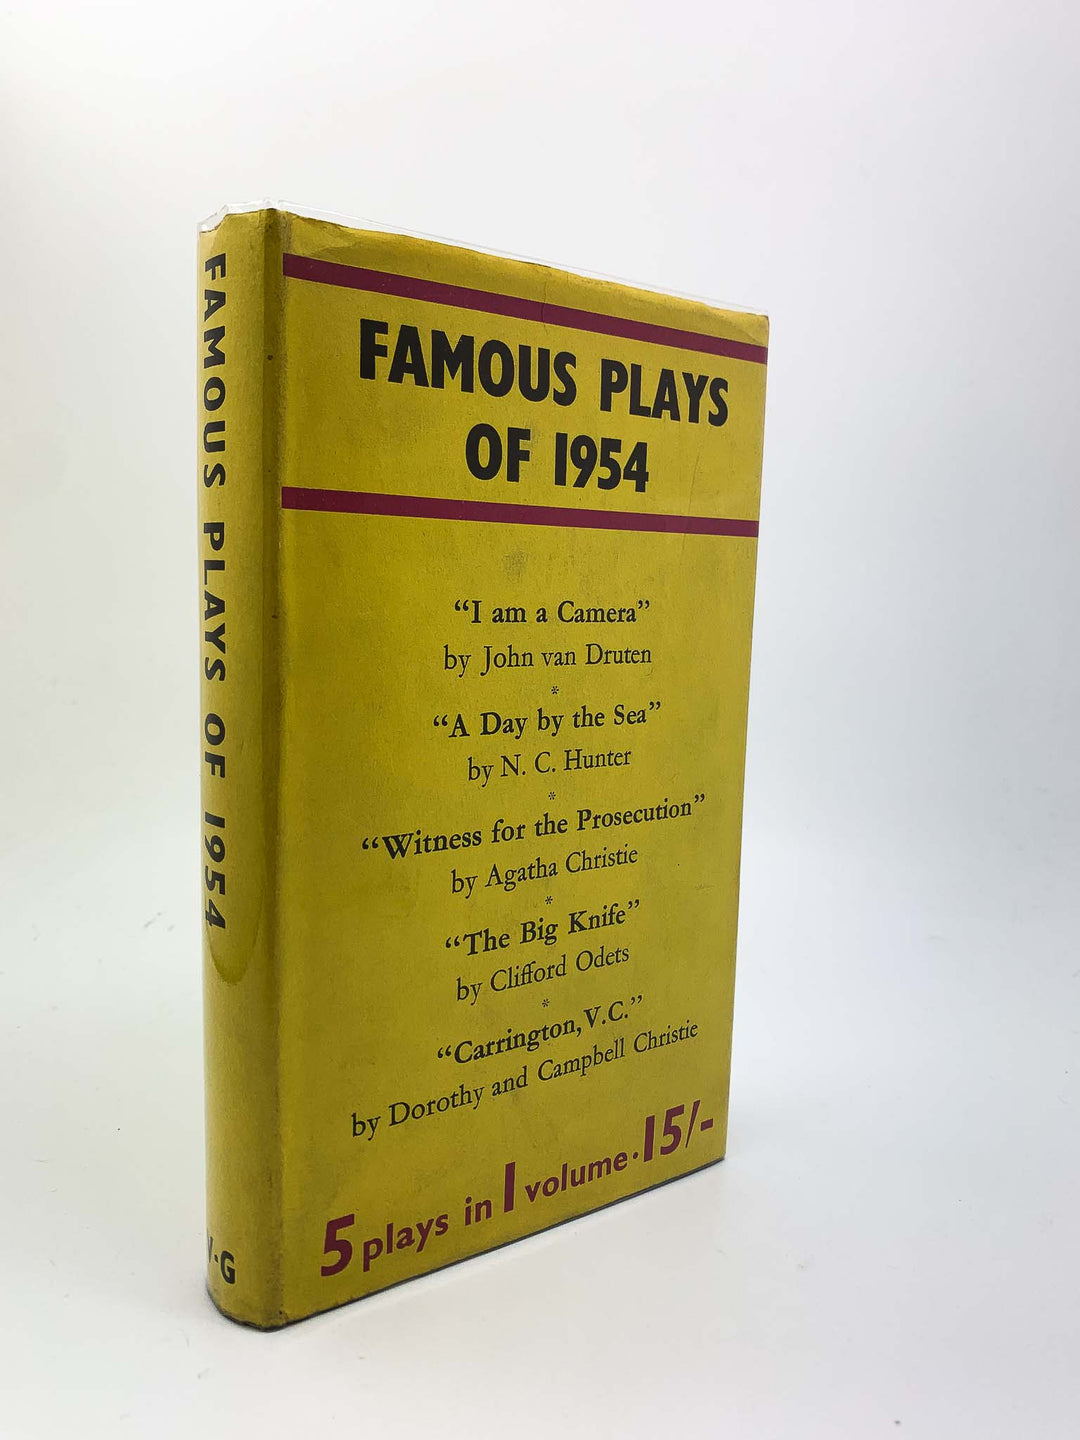 Christie, Agatha - Famous Plays of 1954 | front cover